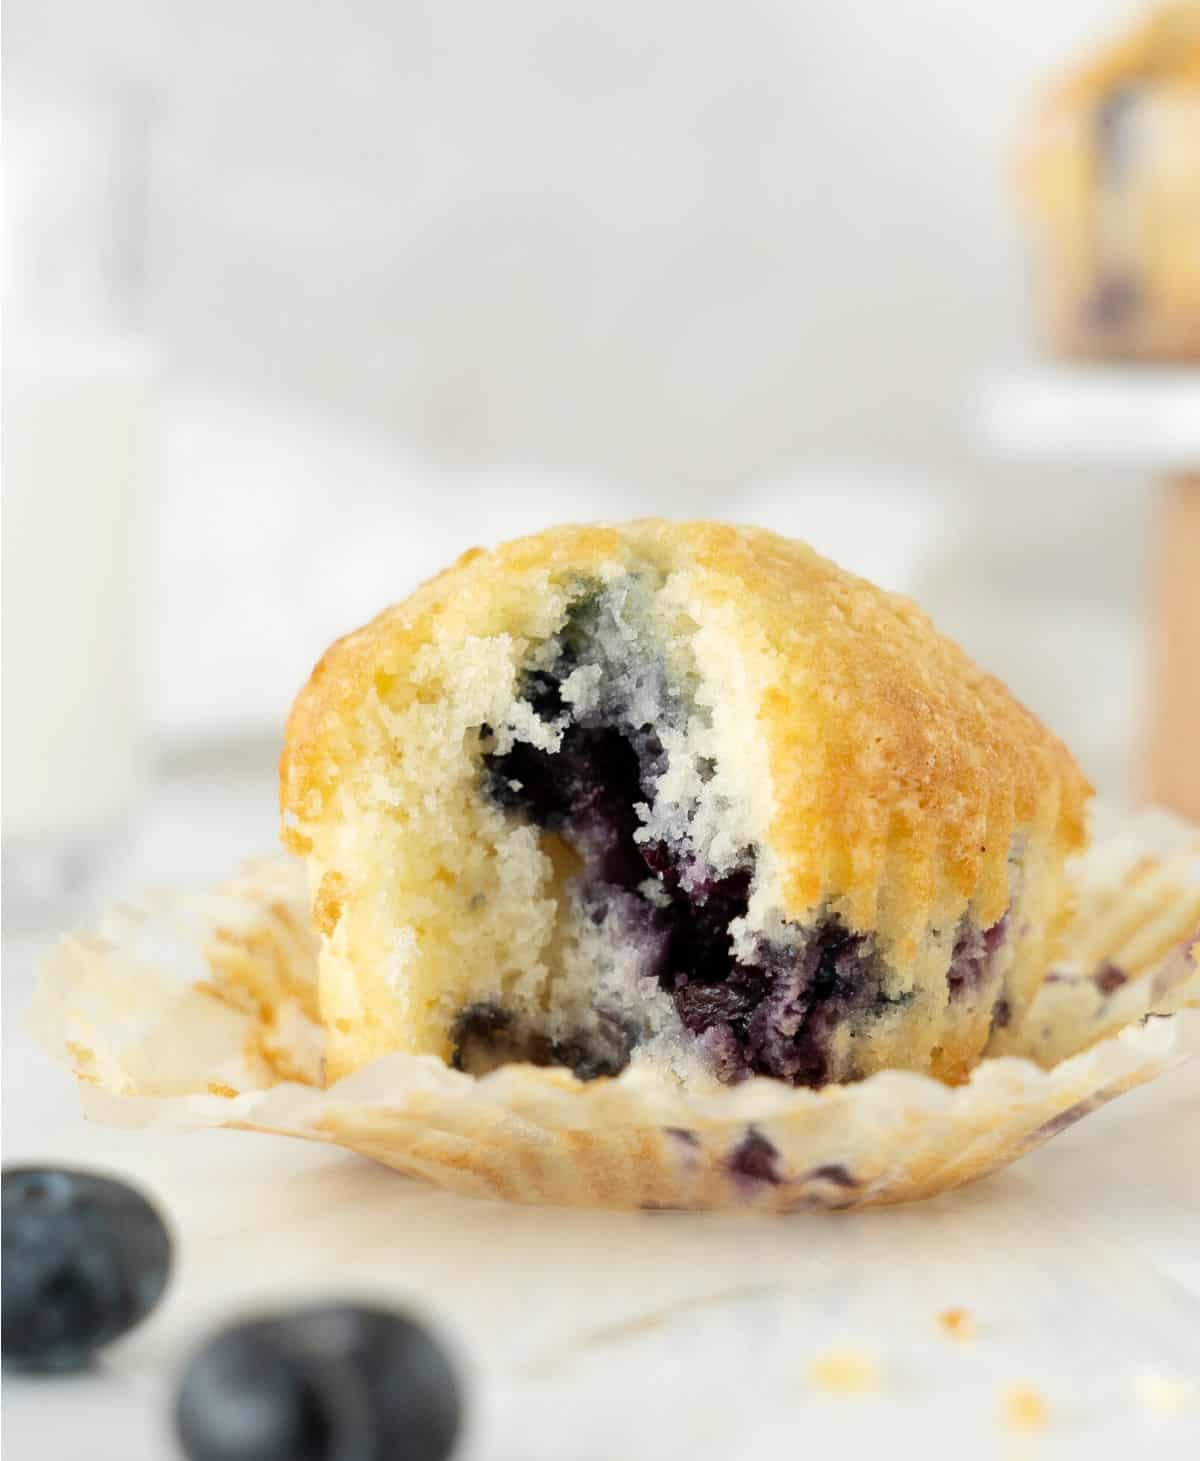 Bitten blueberry muffin in an opened paper liner. White marble surface, light grey background.